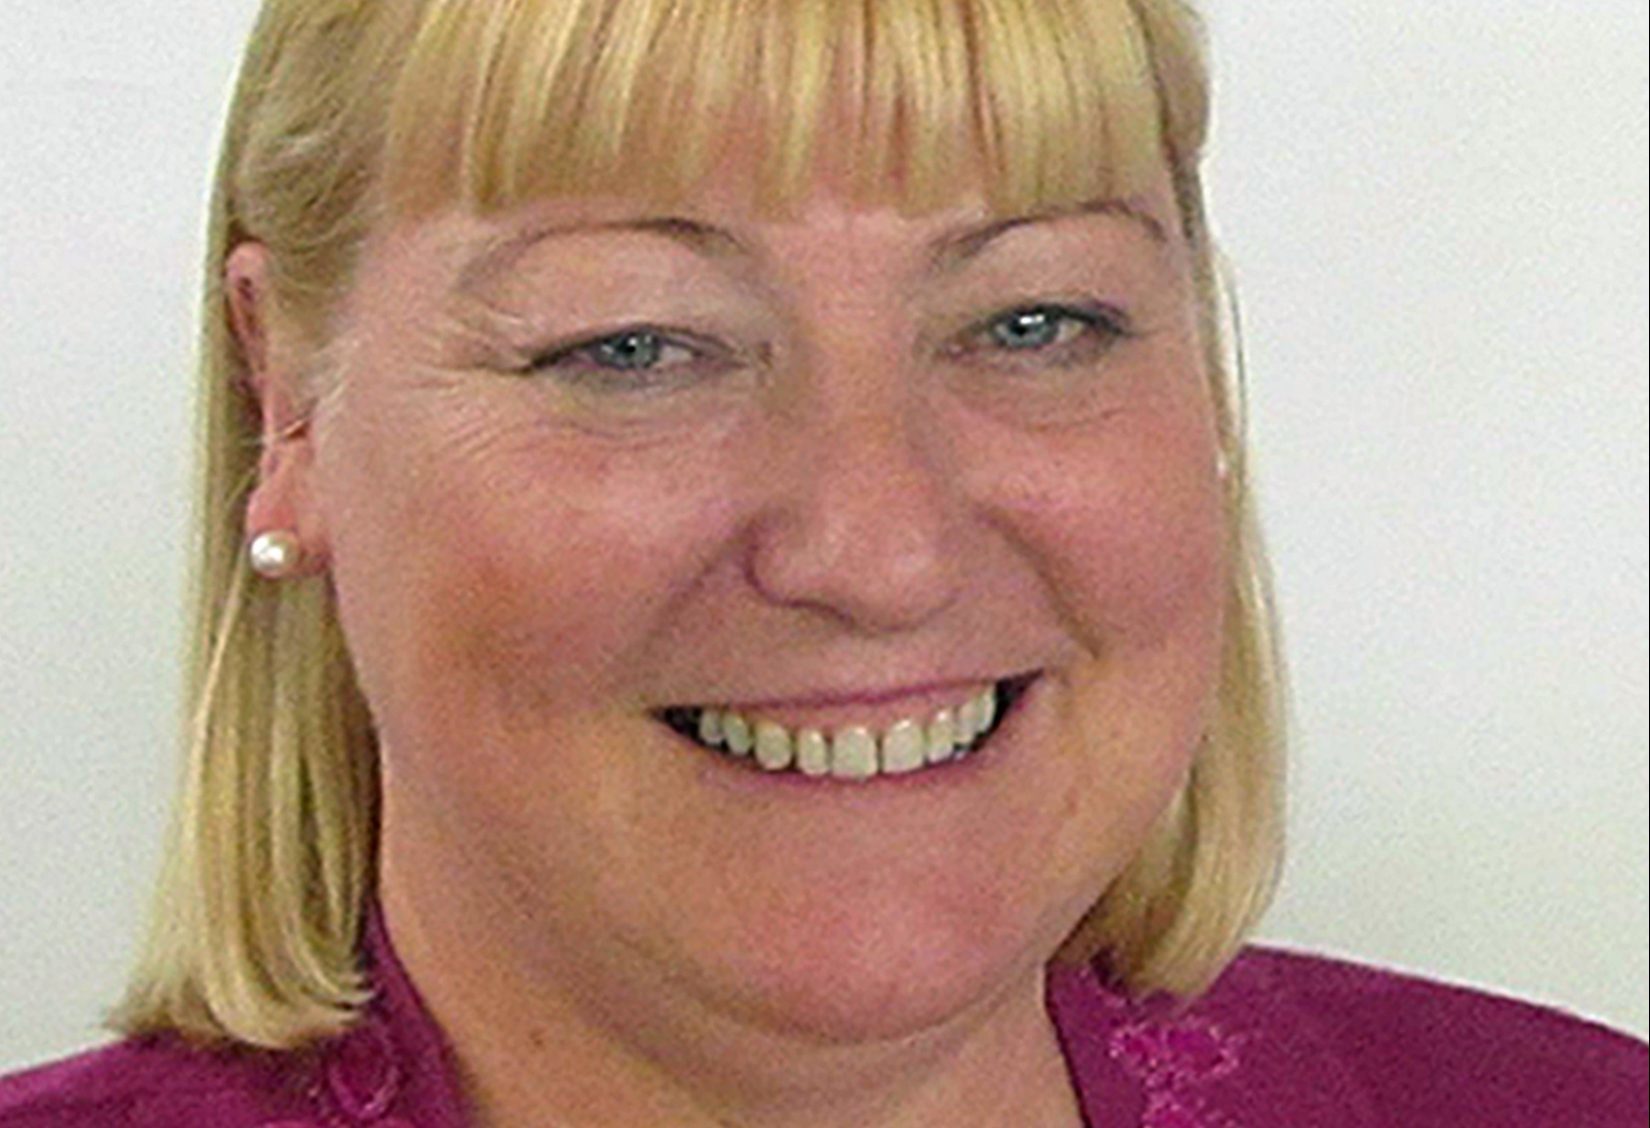 Pat Glass has resigned as shadow education secretary after being appointed to the role on Monday.